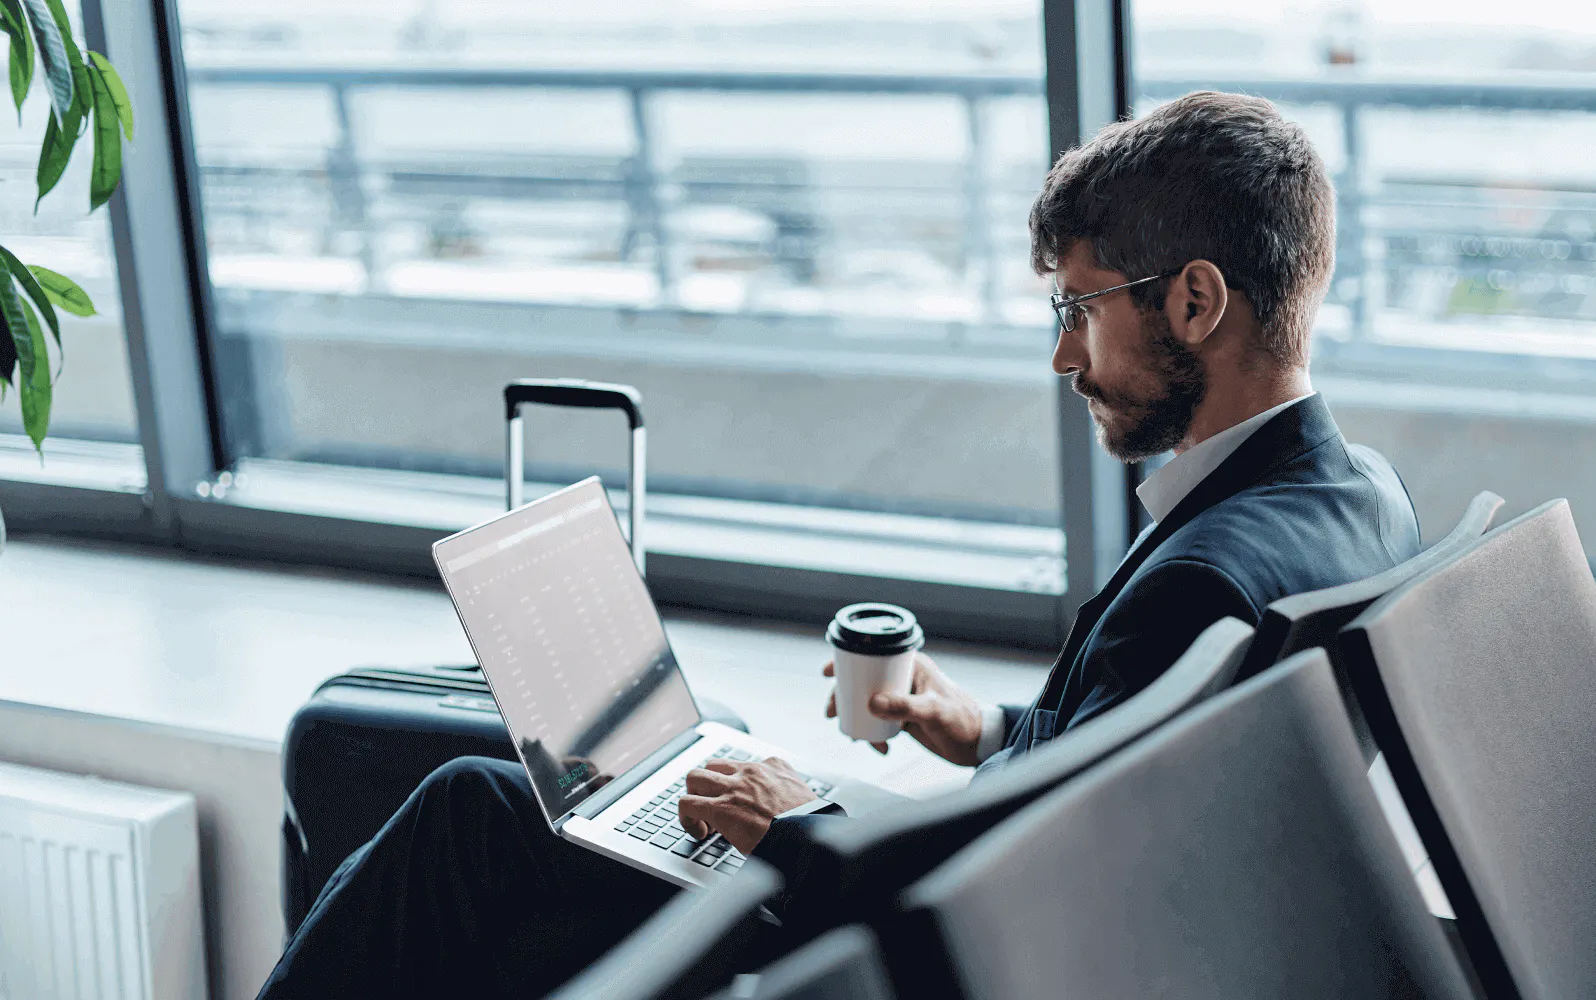 Man sitting in an airport waiting area with his laptop out and coffee in hand